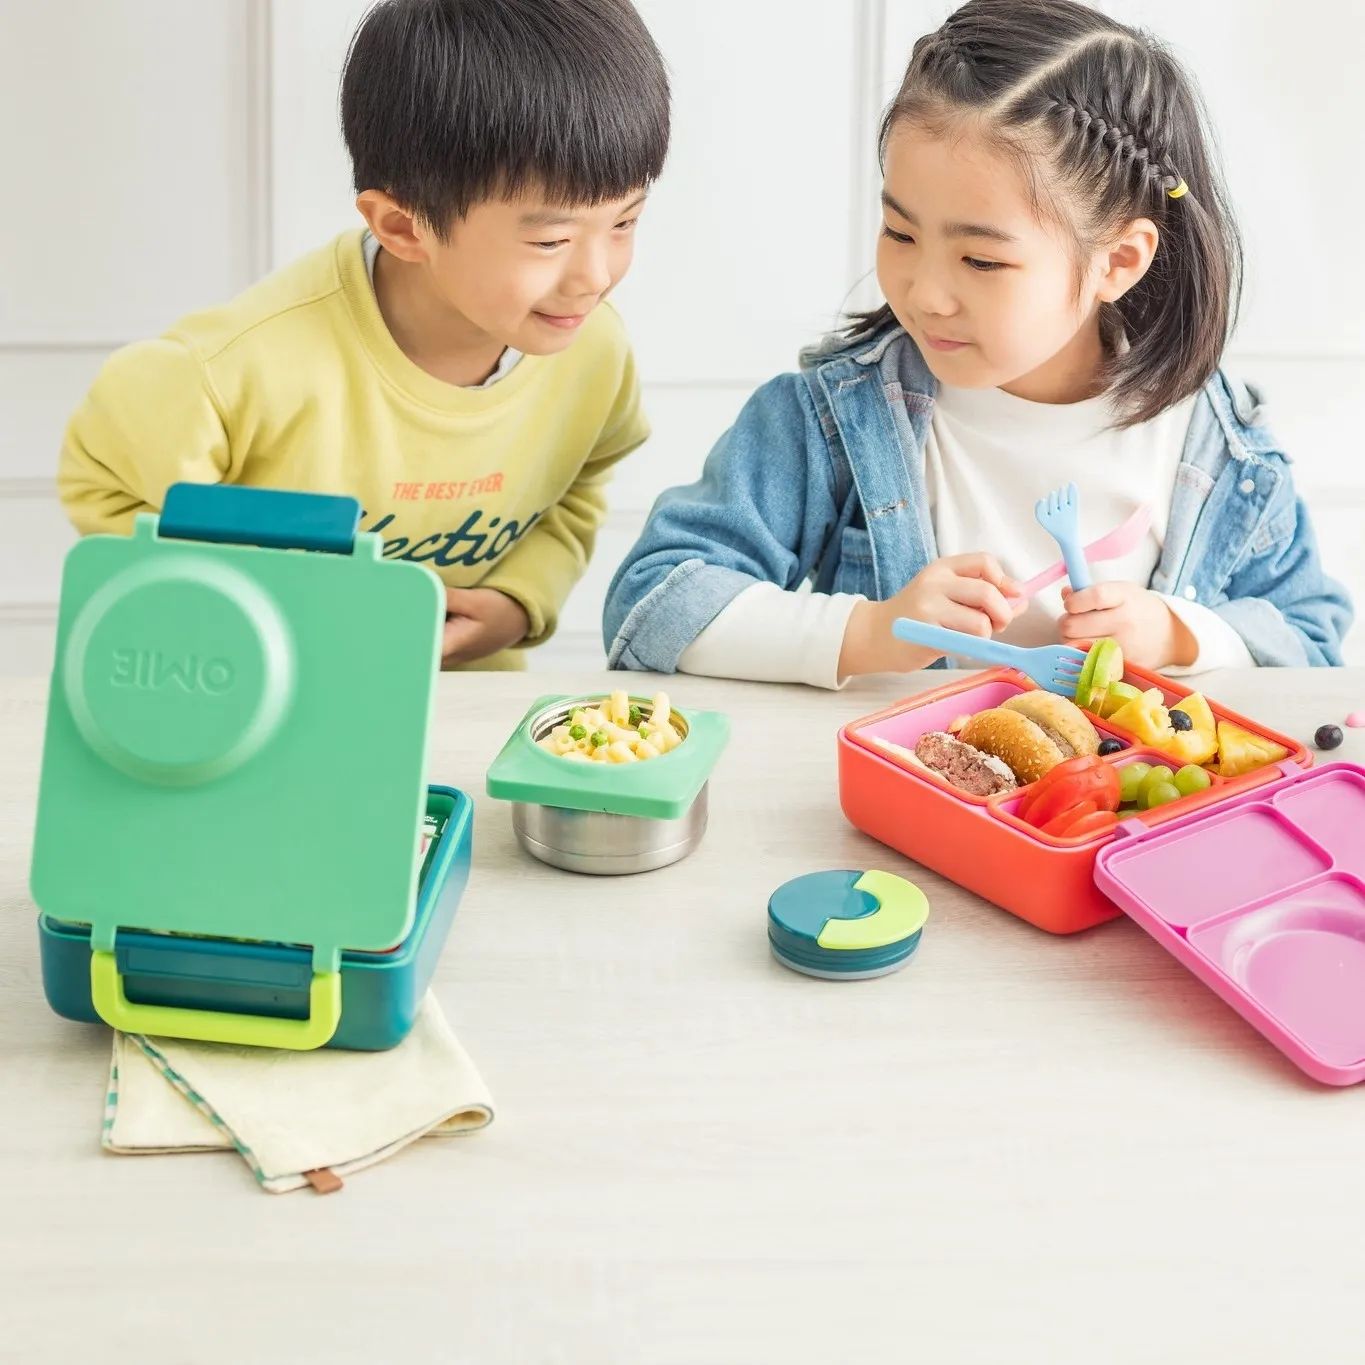 Choosing The Right Lunchbox For Your Child